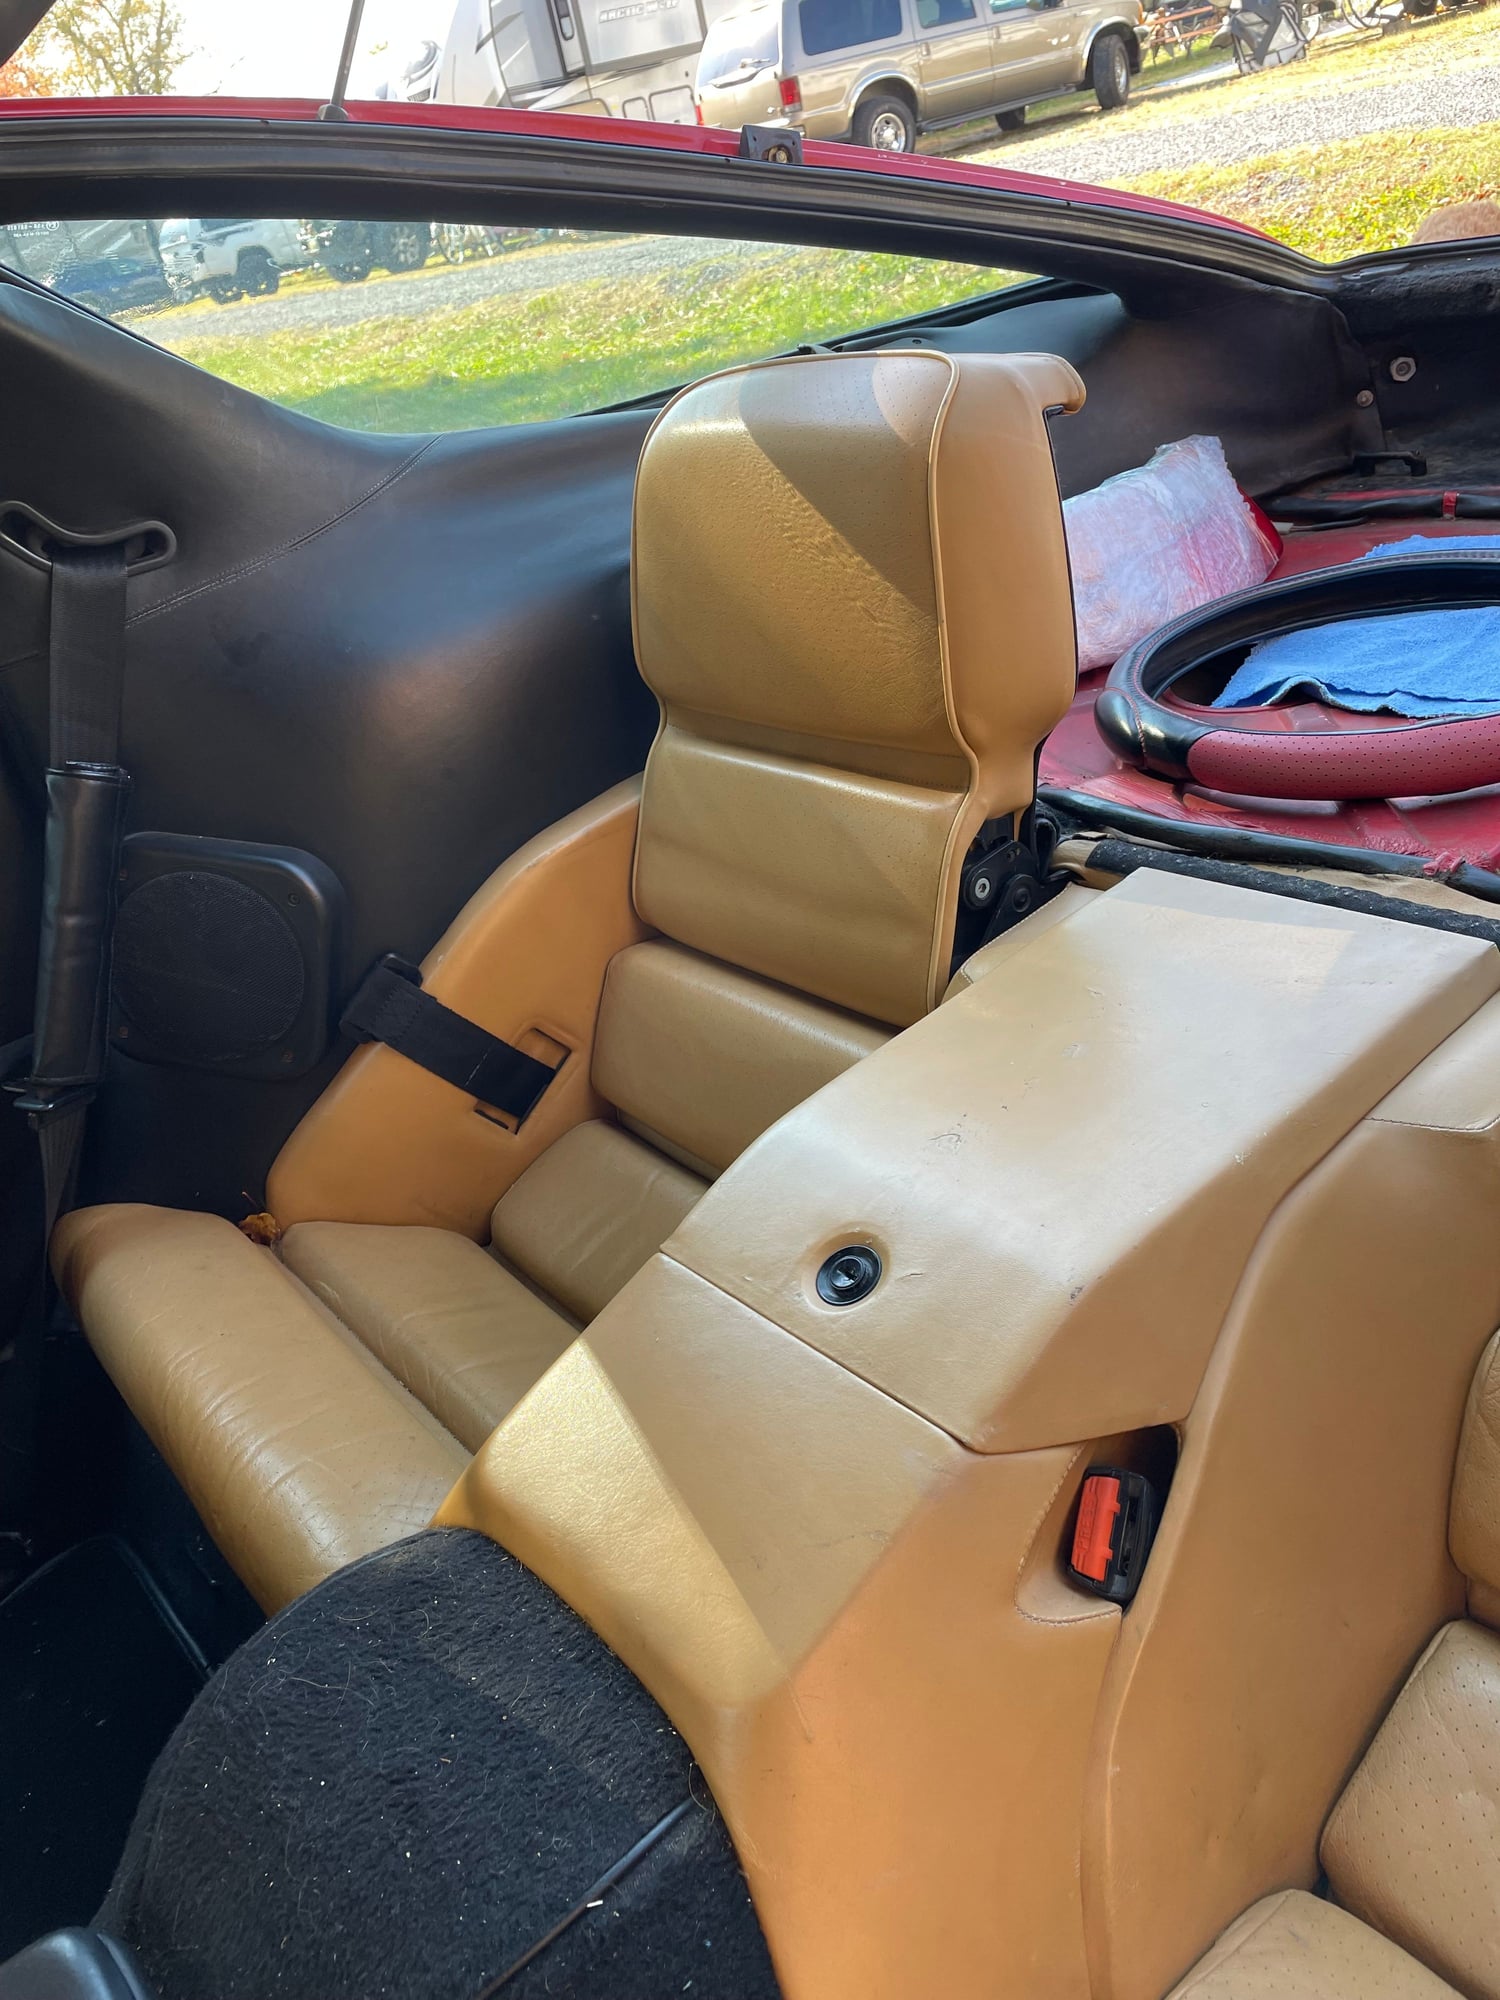 1987 Porsche 928 - 1987 Red Porsche 928 Auto - Used - VIN wp0jb0928hs860344 - 175,000 Miles - 8 cyl - 2WD - Automatic - Coupe - Red - California, MD 20619, United States